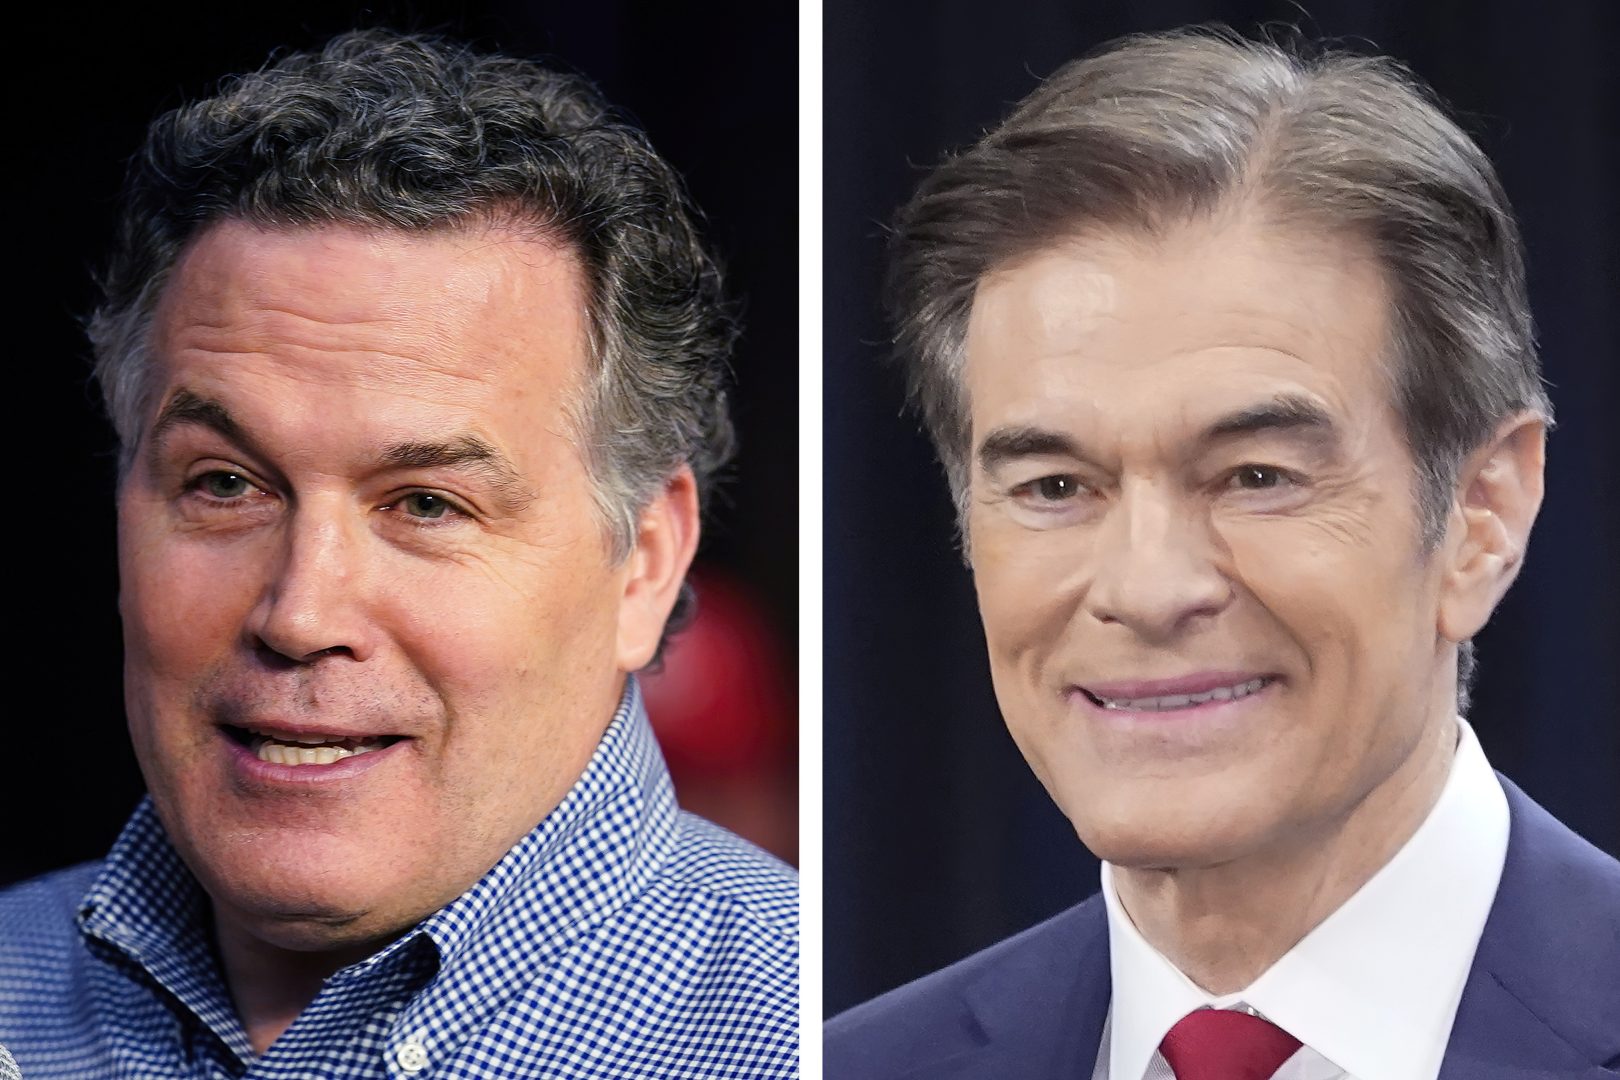 Pennsylvania Republican Senate candidates David McCormick, left, and Mehmet Oz during campaign appearances in May 2022 in Pennsylvania.